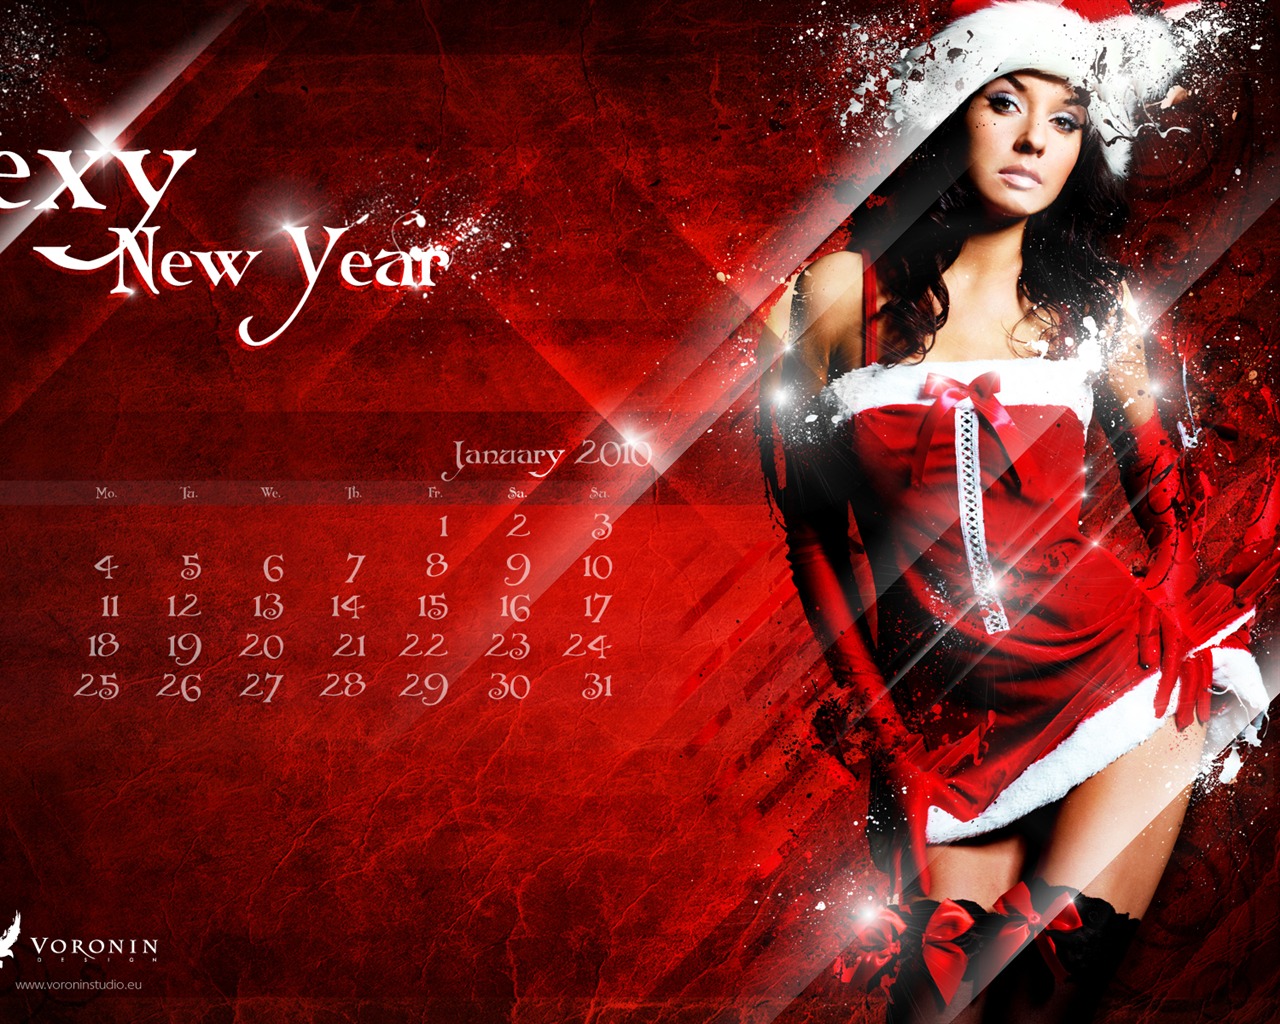 Microsoft Official Win7 New Year Wallpapers #20 - 1280x1024